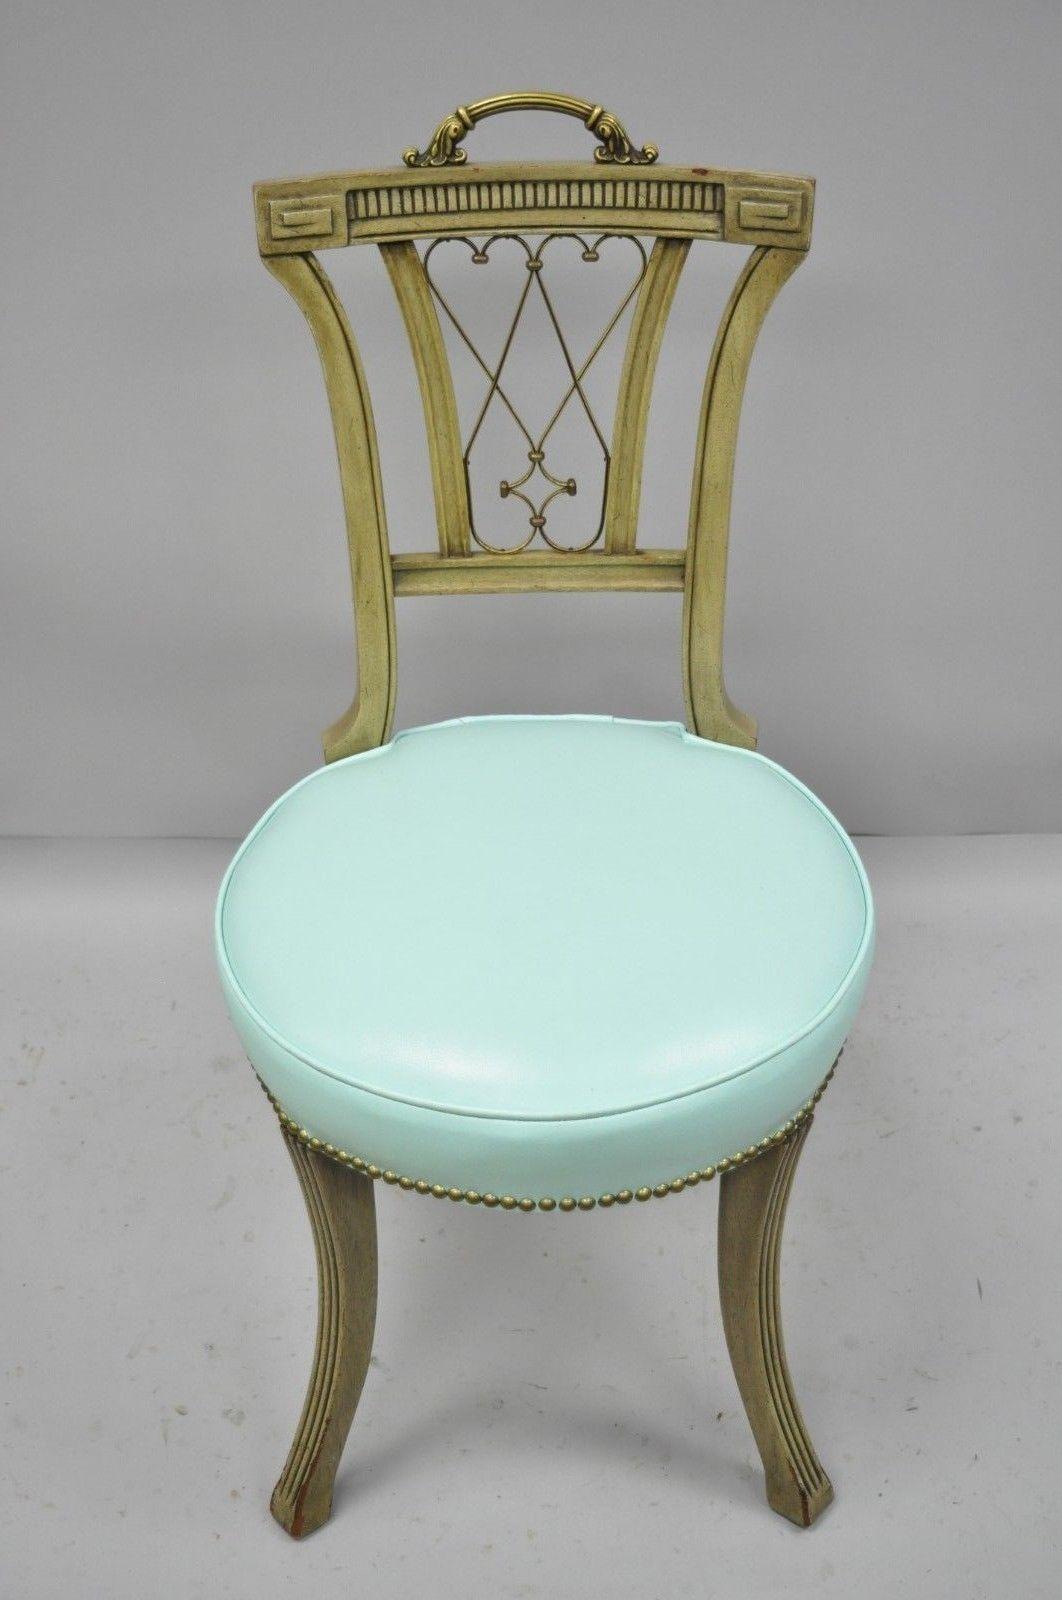 Carved Mahogany Regency Style Chair with Brass Handle and Aqua Blue Vinyl 'B' For Sale 3